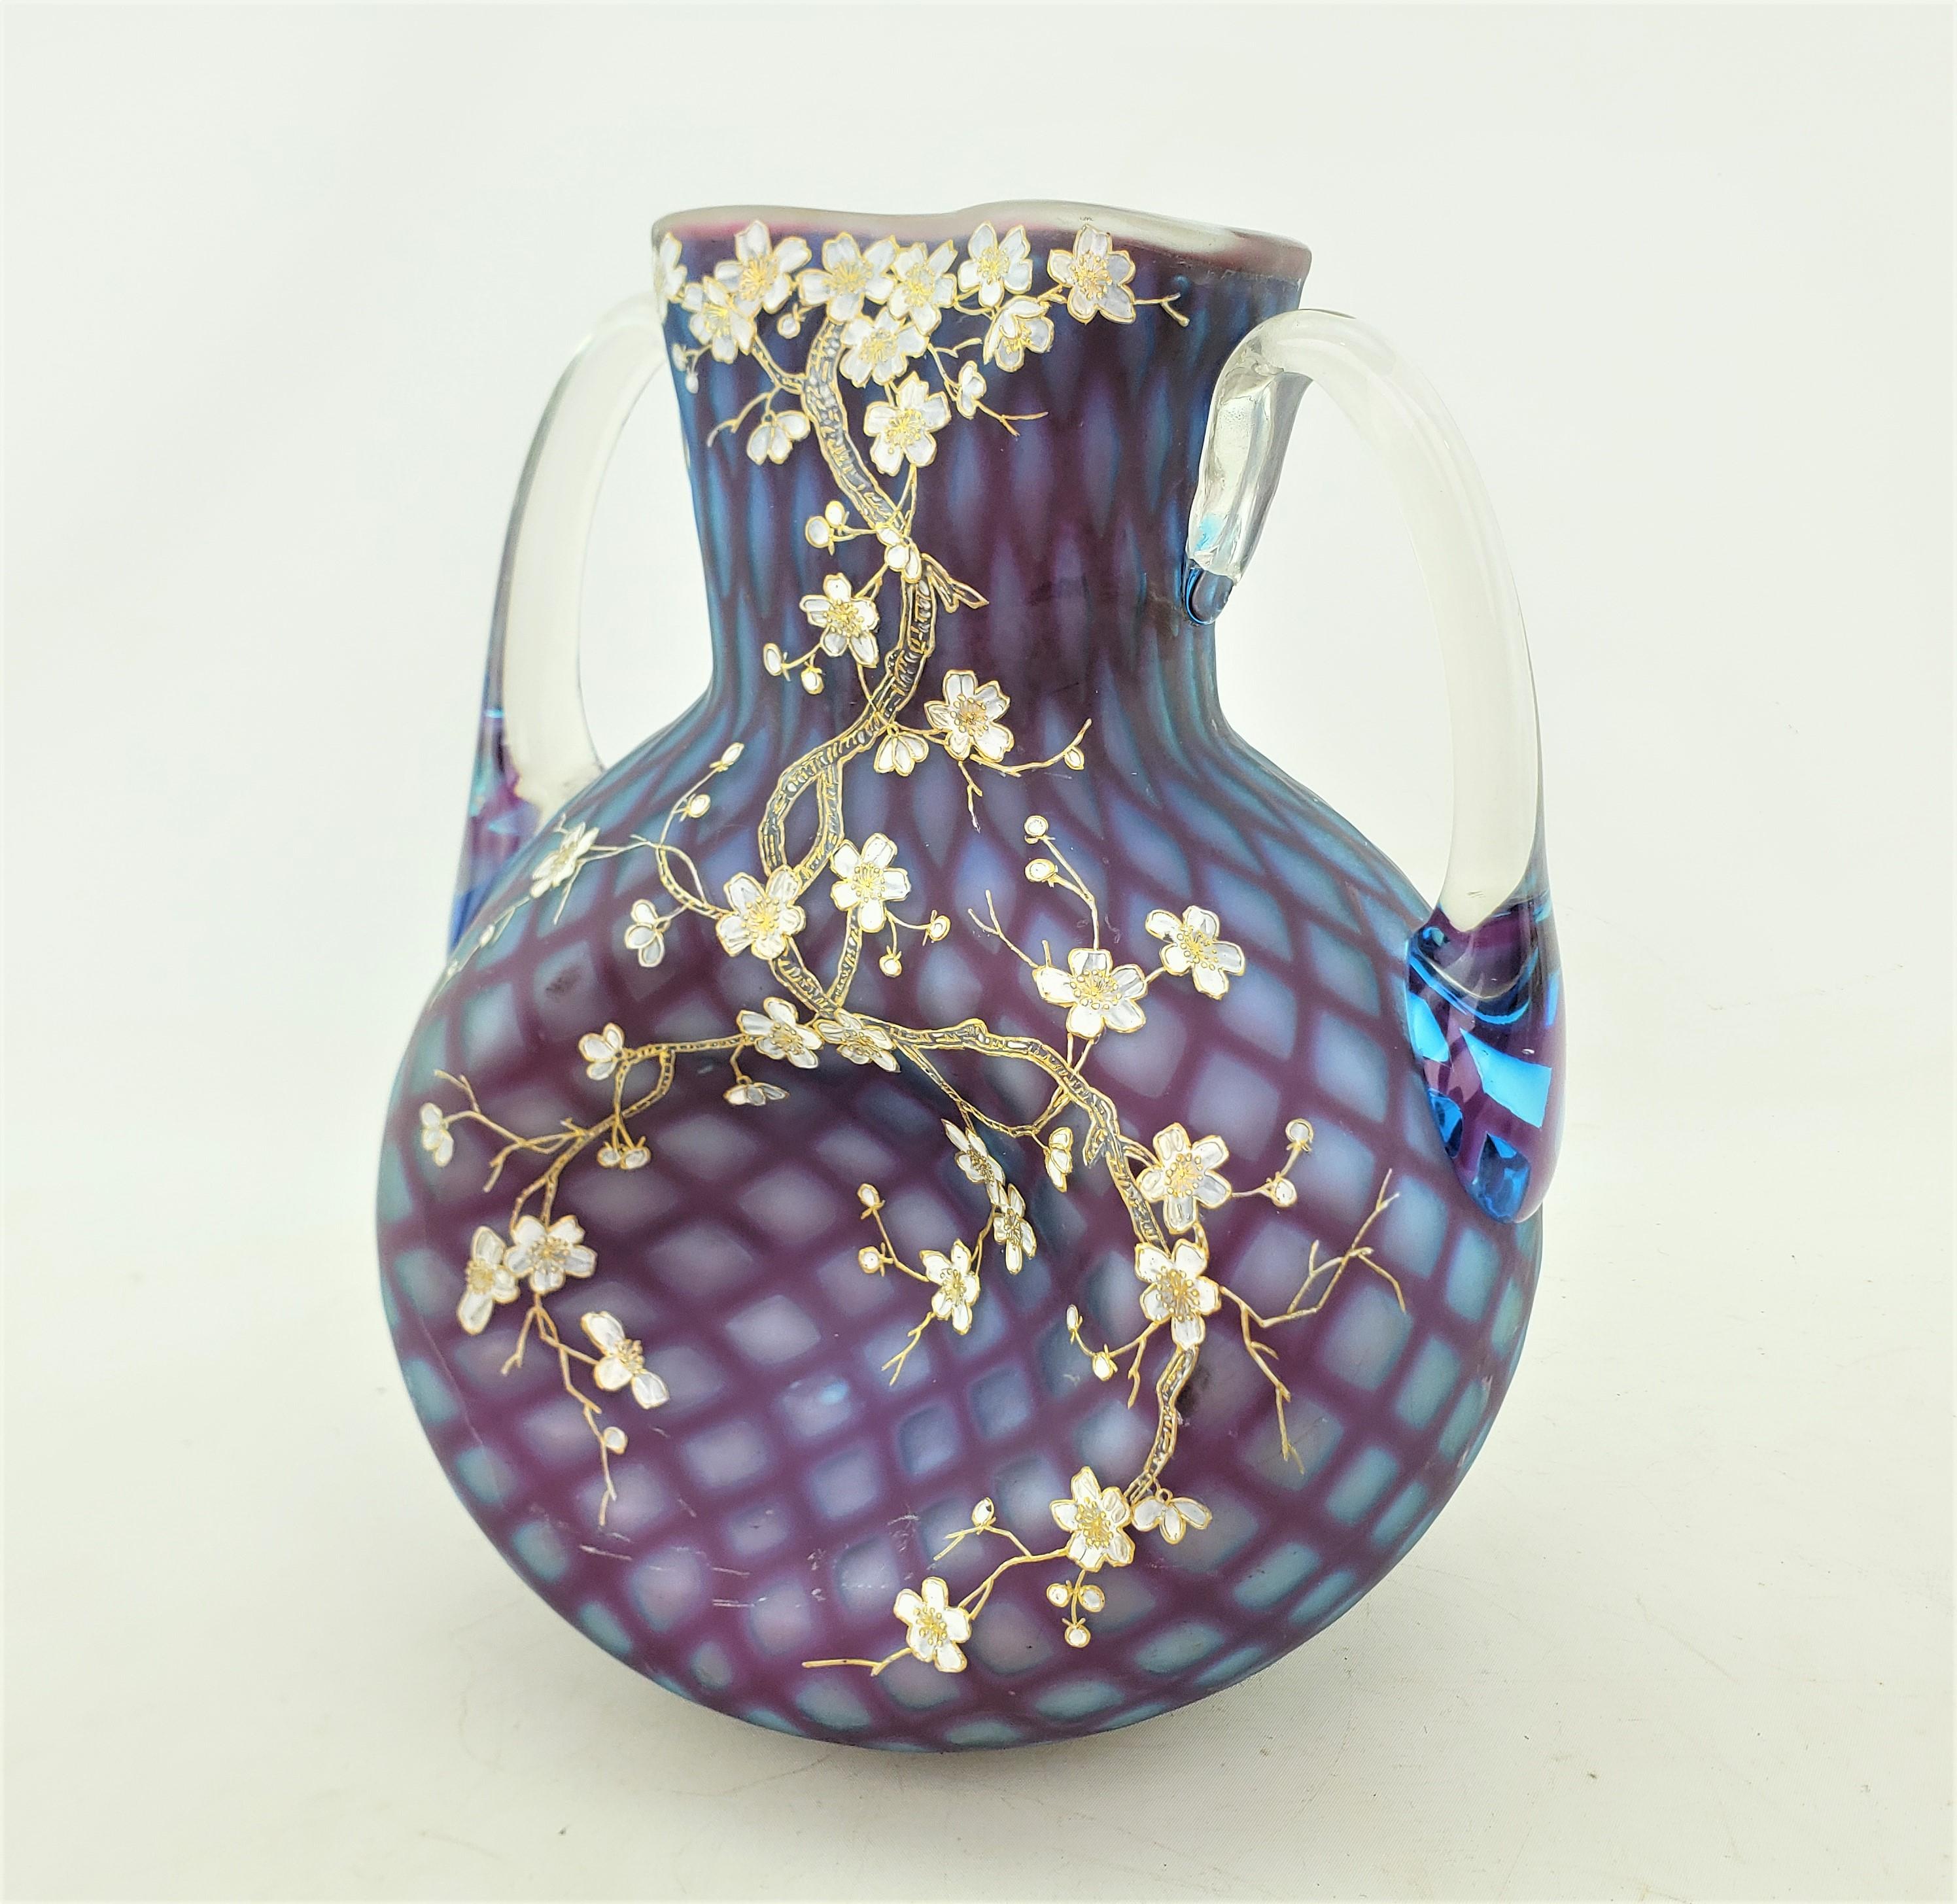 This large antique art glass vase is unsigned, but done in a similar style as that produced by the Mt. Washington Glass works of the United states, dating to approximately 1880 and done in the period Victorian style. The vase has a unique squared